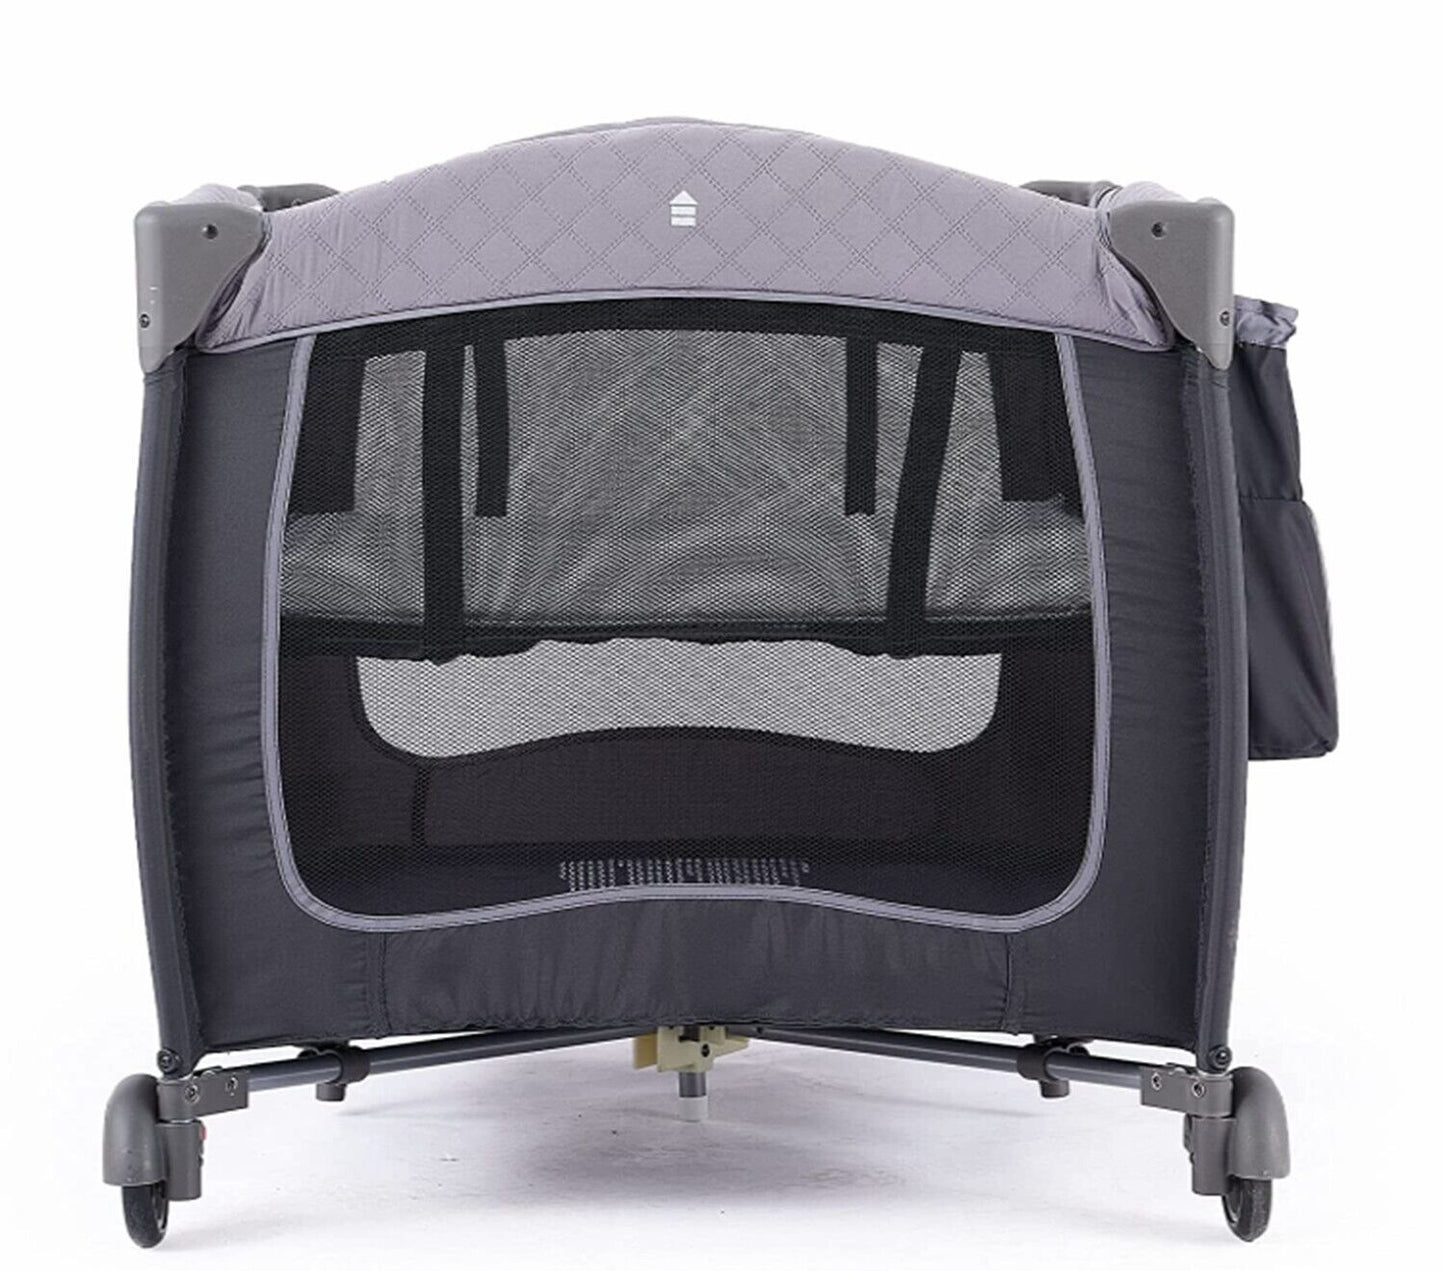 Evenflo Baby Stroller with Safemax Car Seat Travel System Nursery Playard Combo